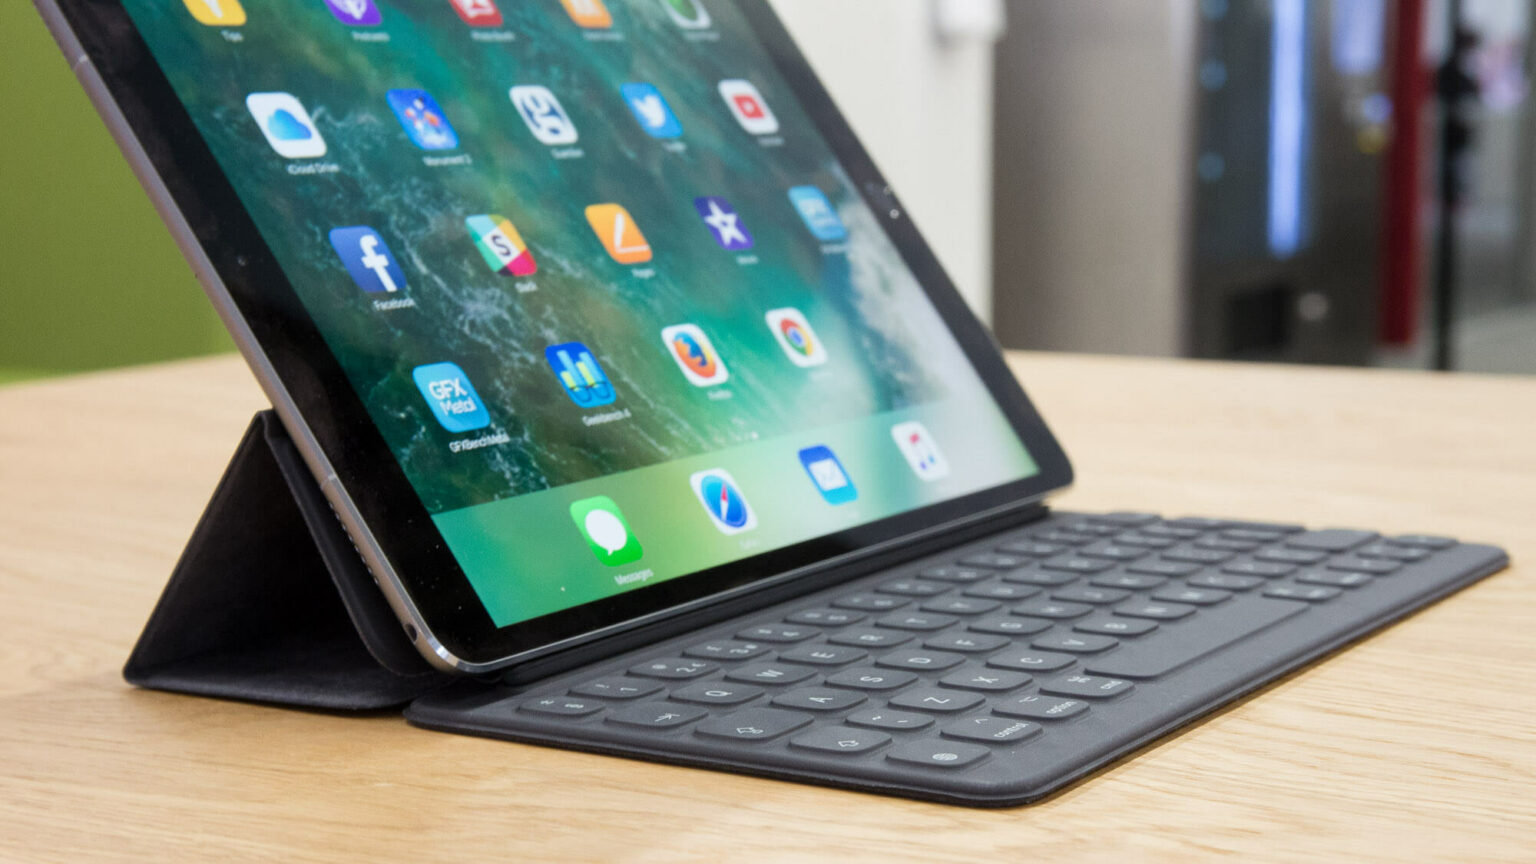 Can You Earn Money Using iPad Pro? - Your Income Advisor